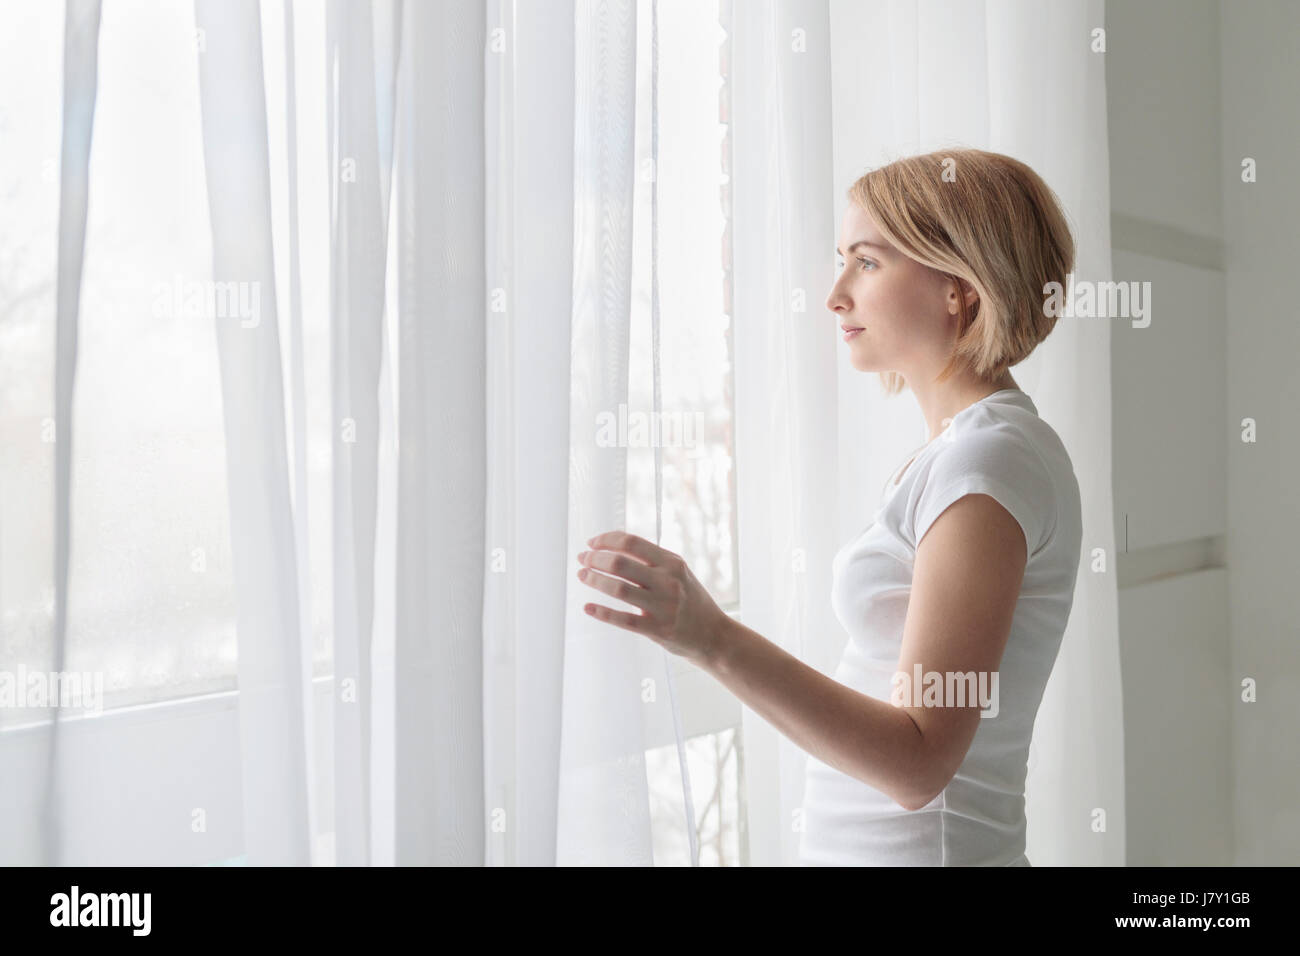 Young woman wearing white t-shirt looking out through window Stock Photo